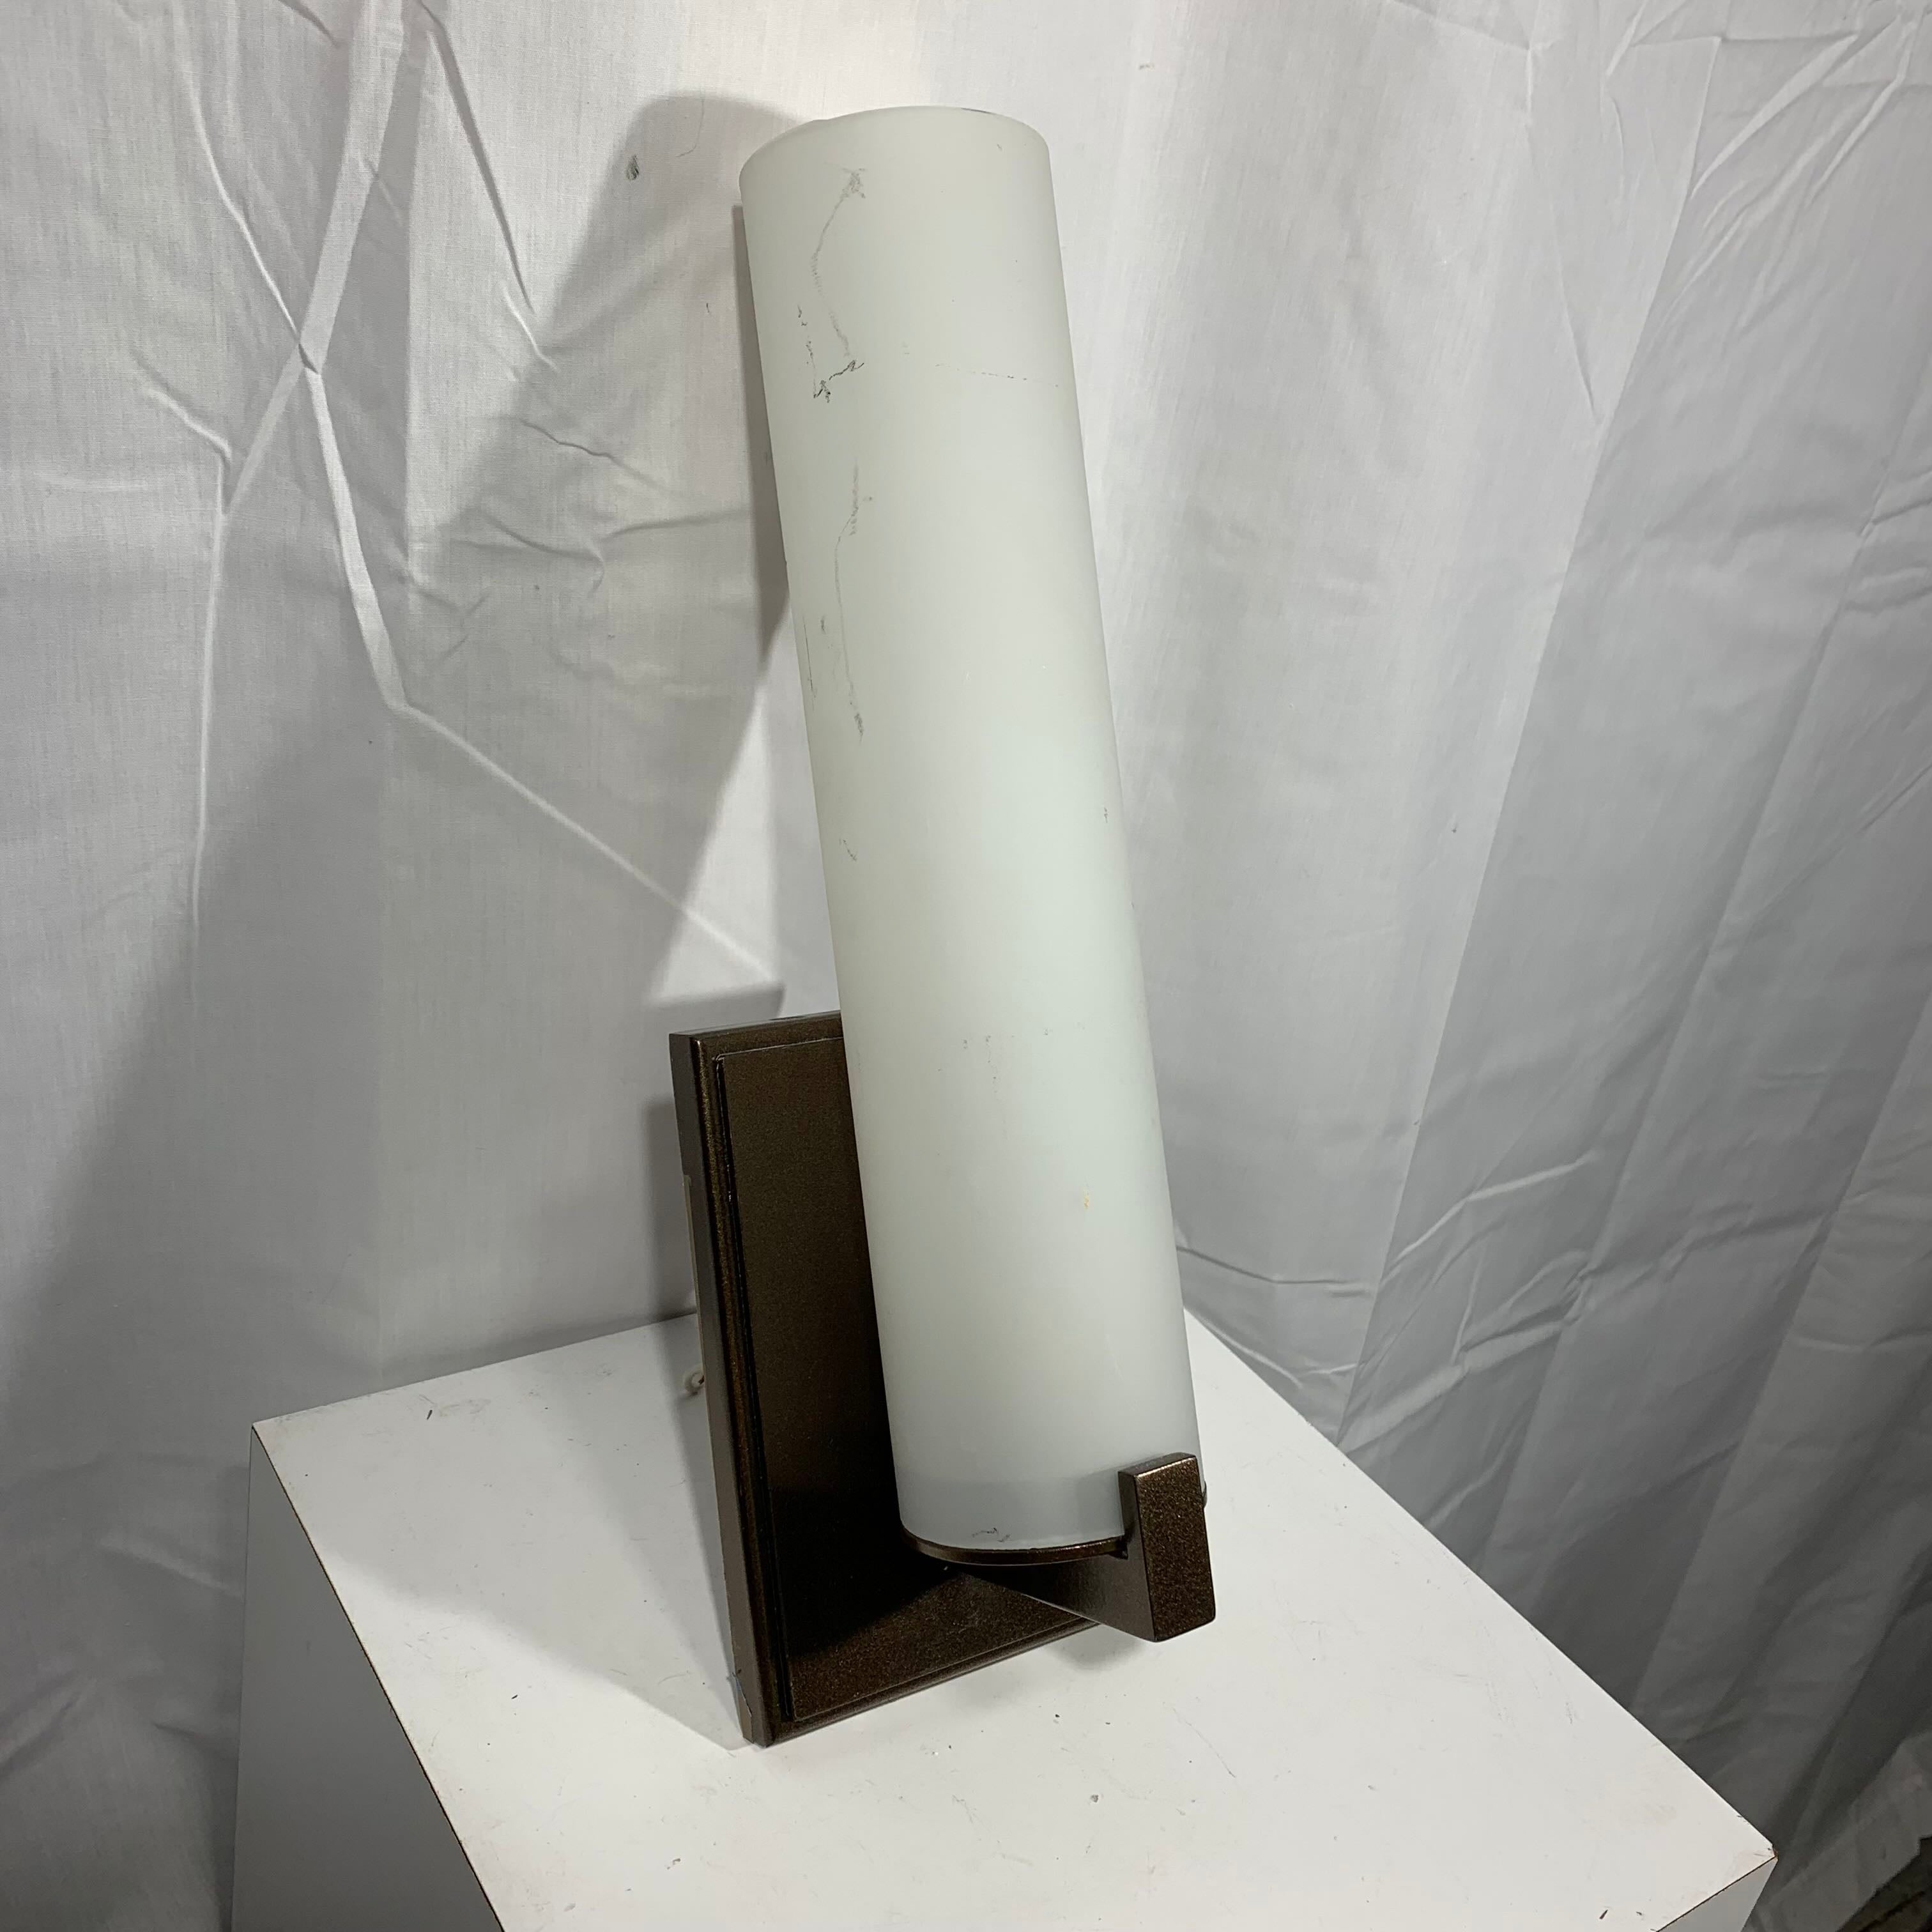 6" Diameter x 15" Unilight Brown Metal with Glass Cylinder Shade Various Condition Wall Sconce